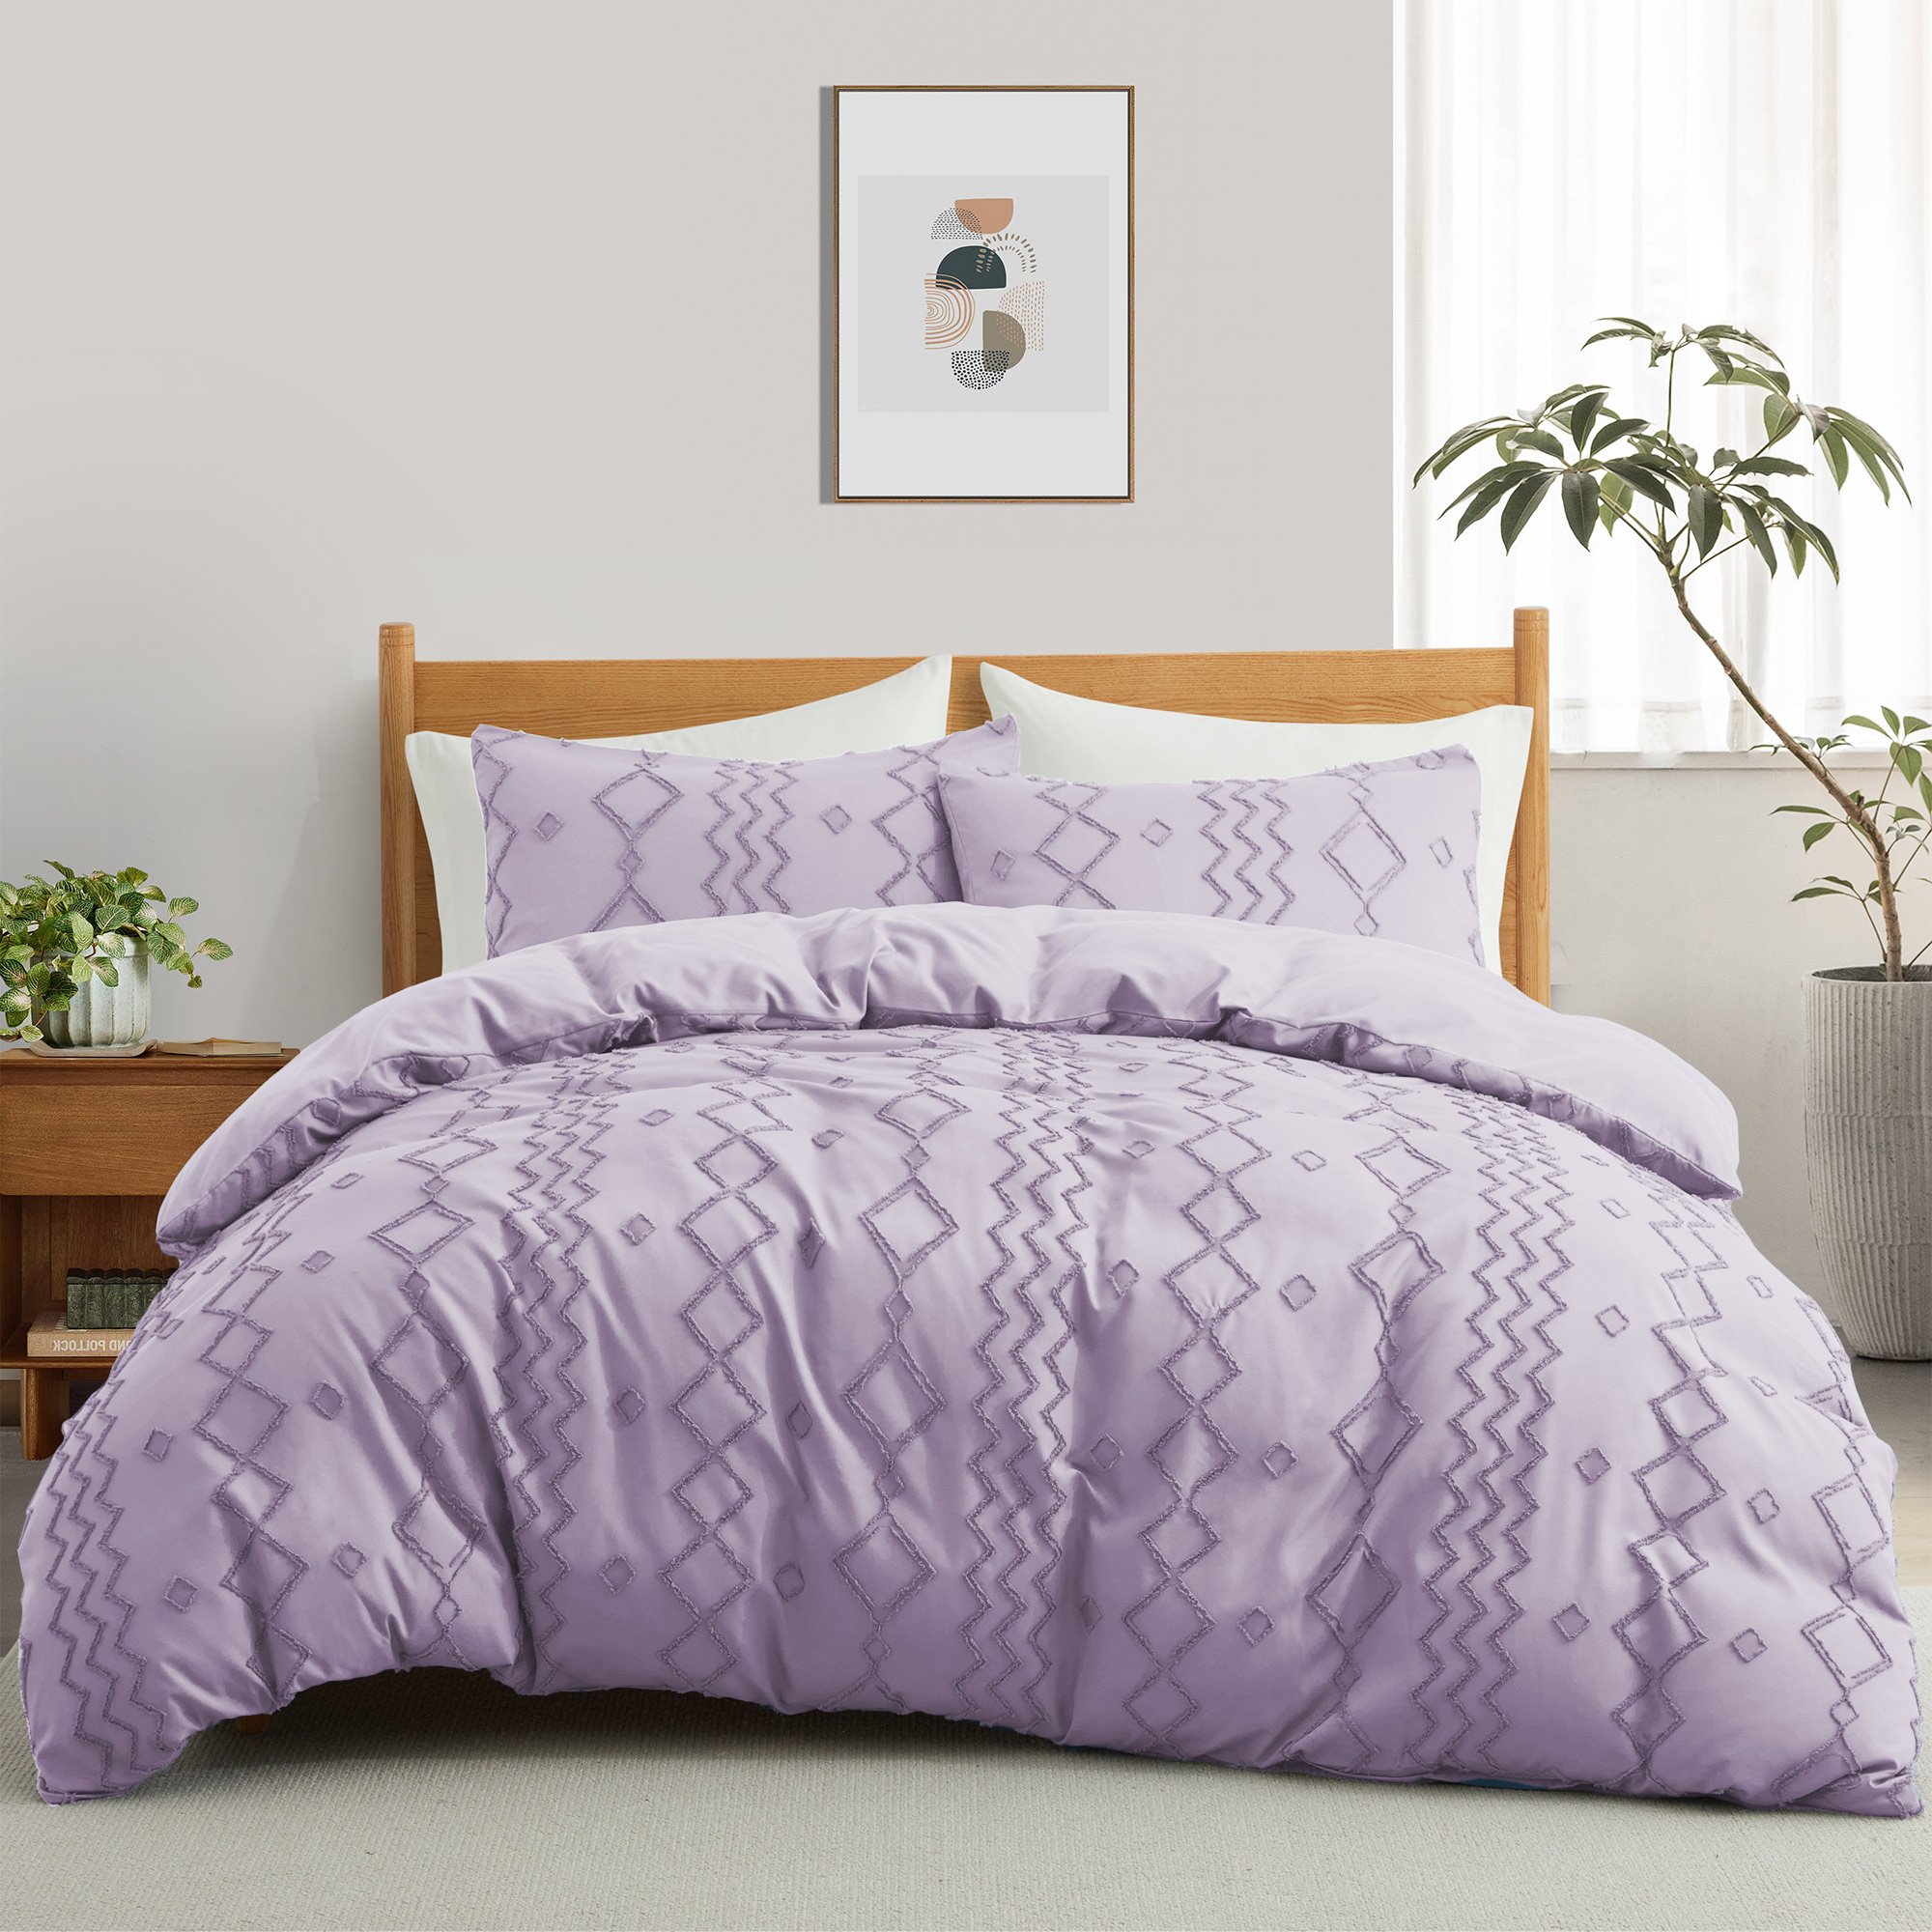 Basic Bedding Sets With All Season Goose Down Feather Comforter, 2 Pack Goose Down Pillows, Duvet Cover Set - Purple Bundles Option, Full/Qu